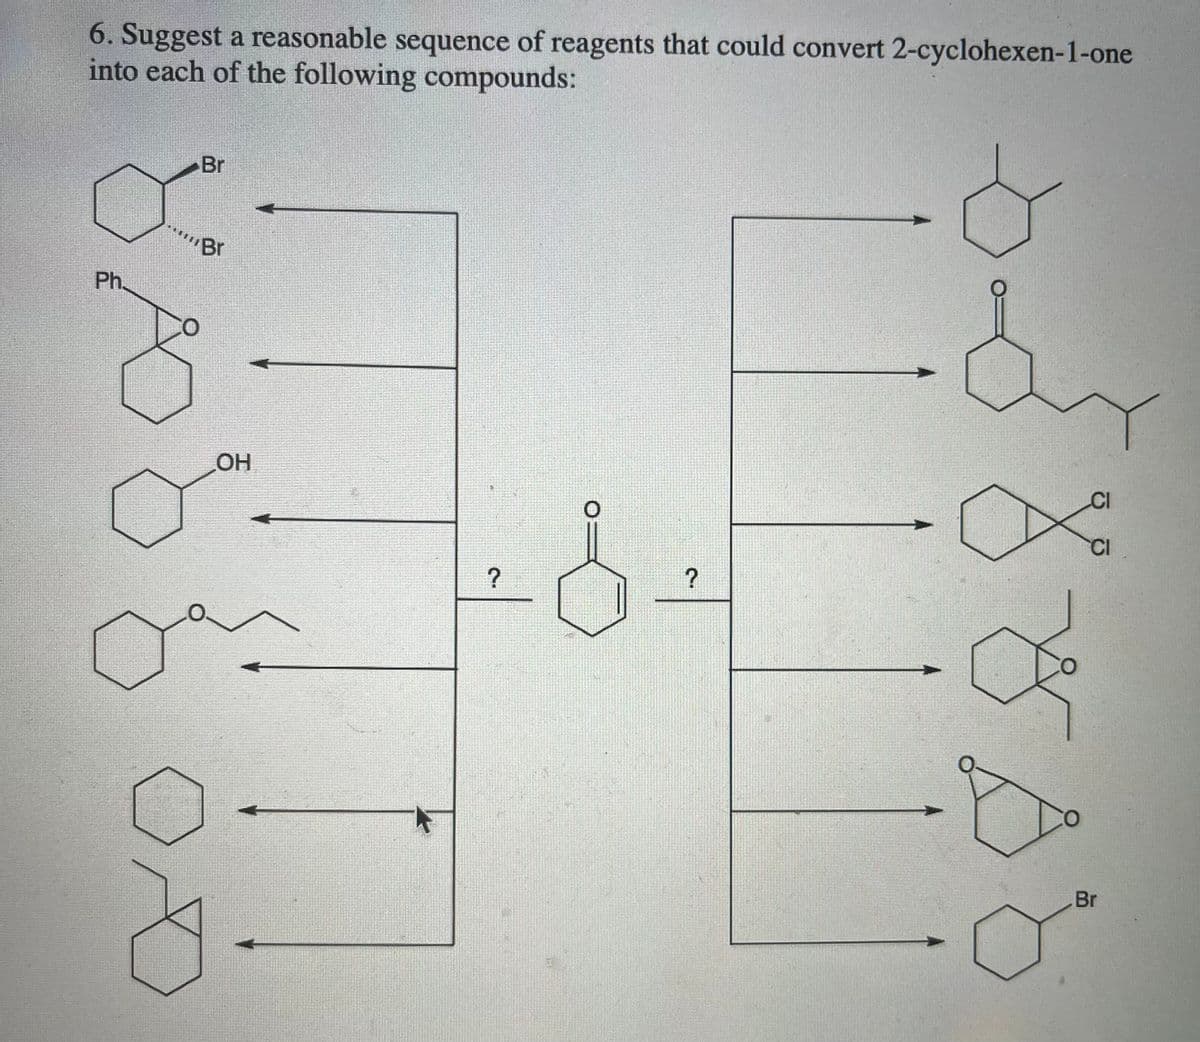 6. Suggest a reasonable sequence of reagents that could convert 2-cyclohexen-1-one
into each of the following compounds:
o
Ph.
Br
Br
0
X
OH
²d-
?
?
X
5
A
CO
CI
CI
Br